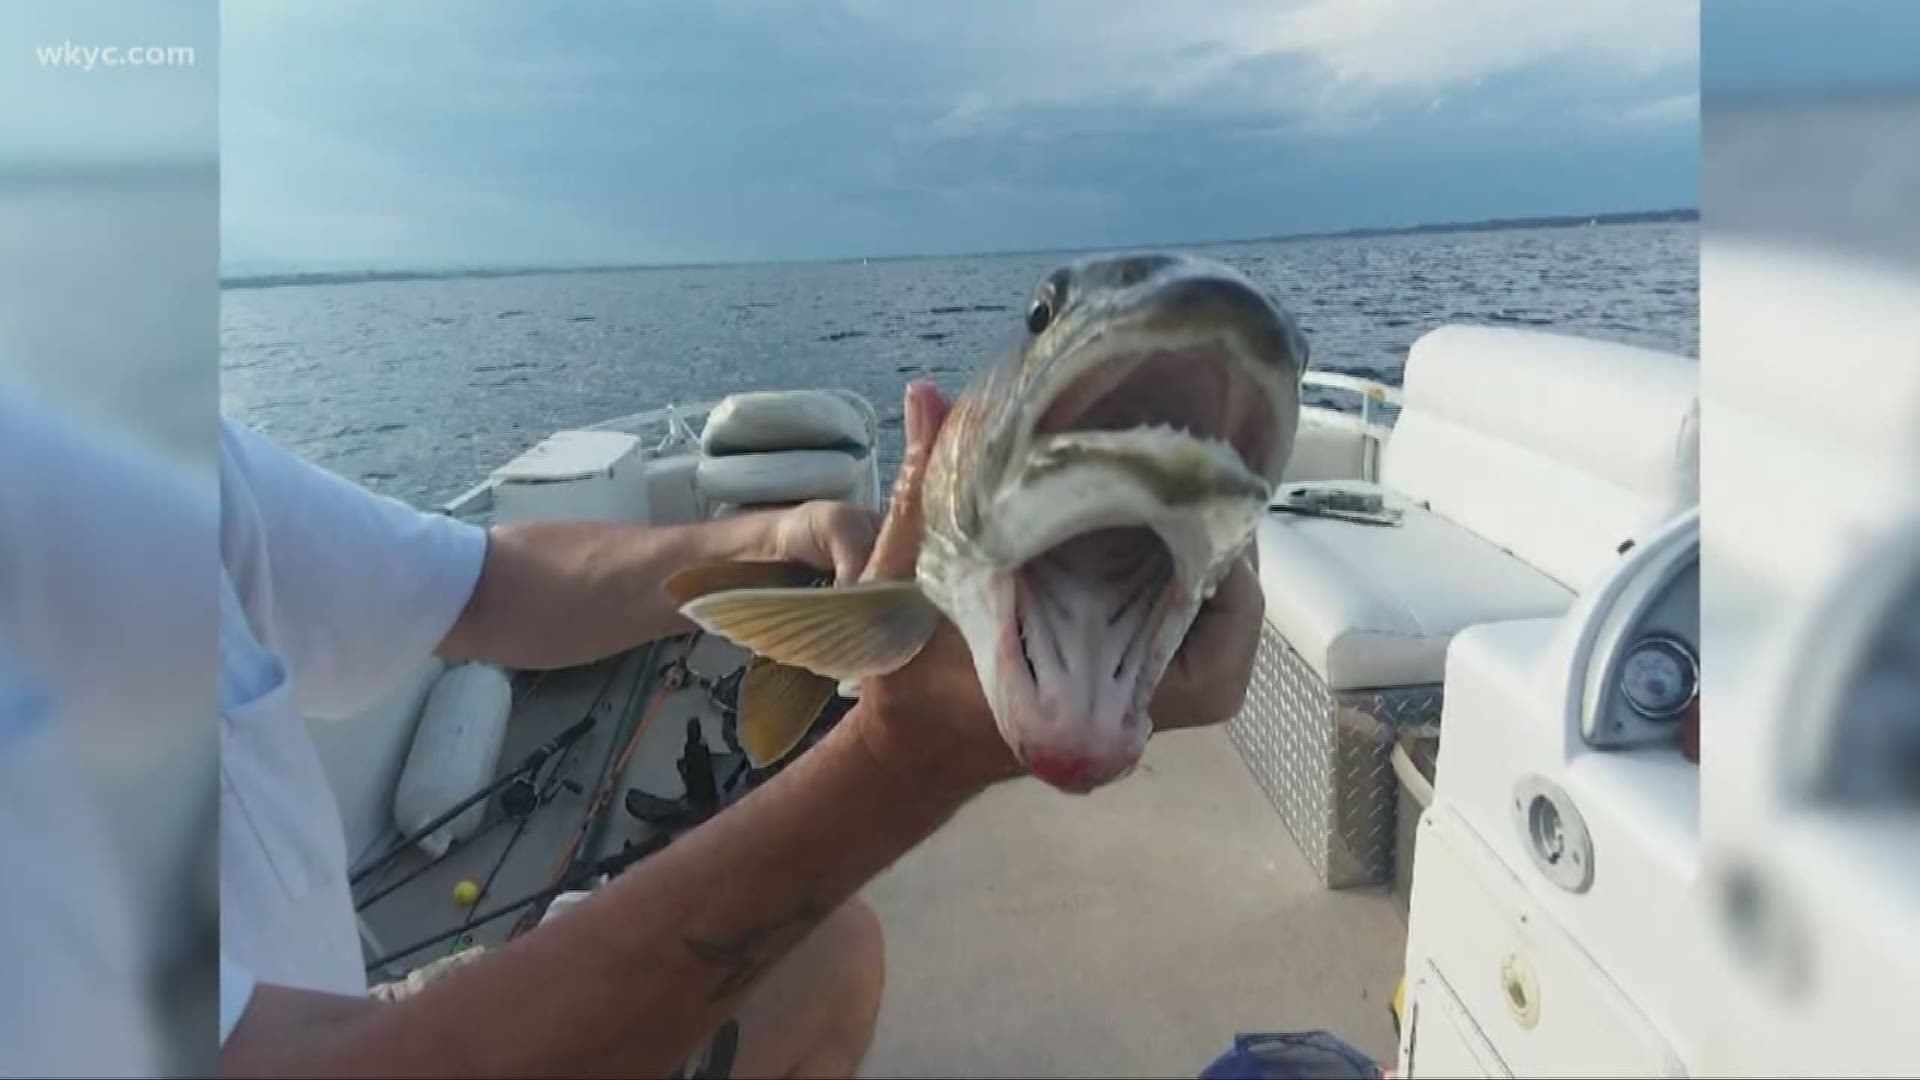 Aug. 26, 2019: Yep... That's a fish with two mouths. A woman's recent catch is taking social media by storm.